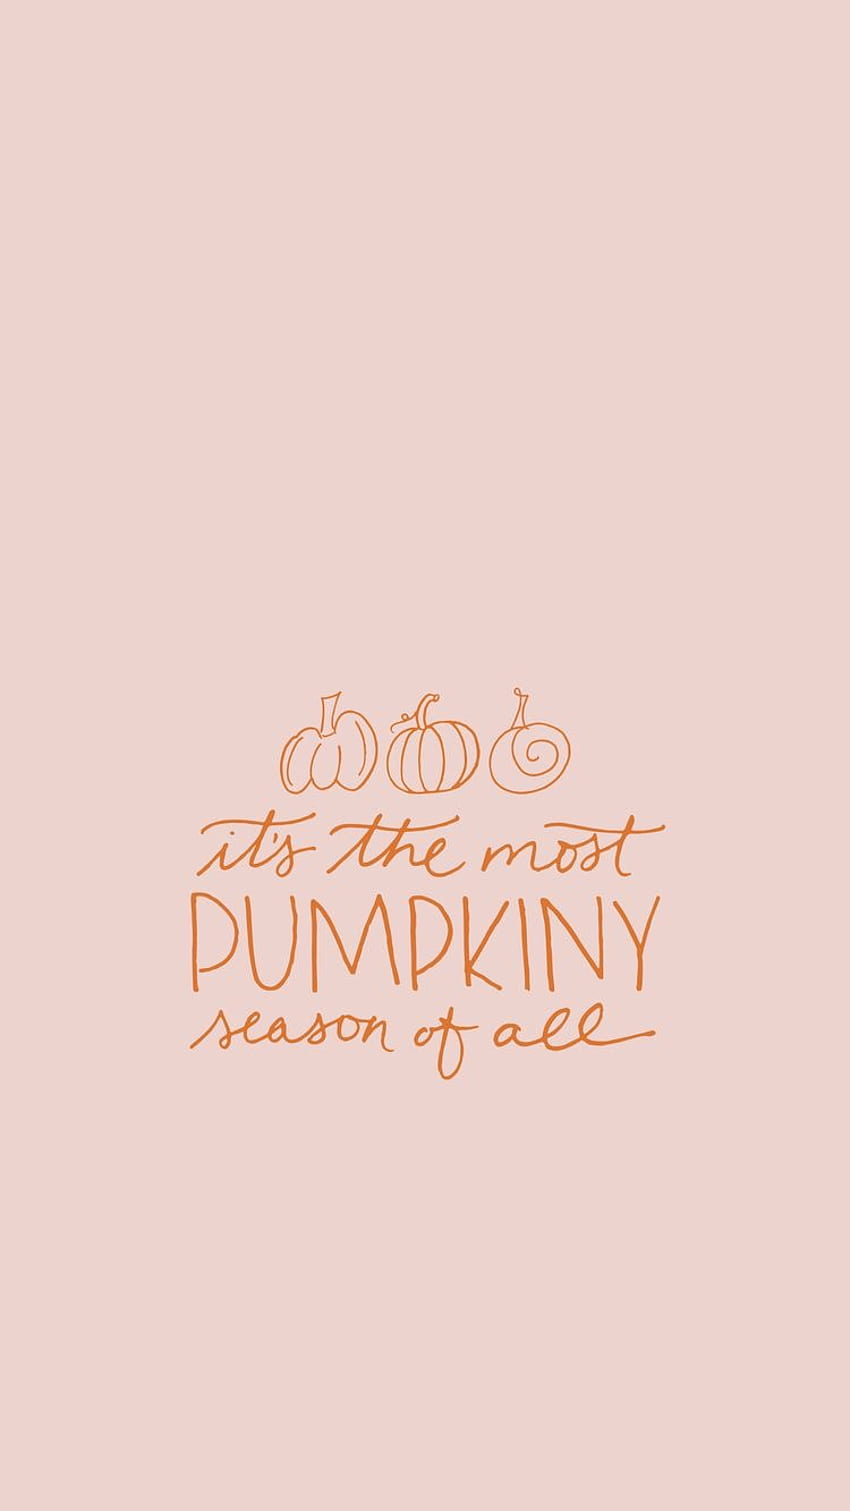 Aesthetic Fall iPhone You Need for Spooky Season! – Chasing Chelsea, Cute Autumn iPhone HD phone wallpaper